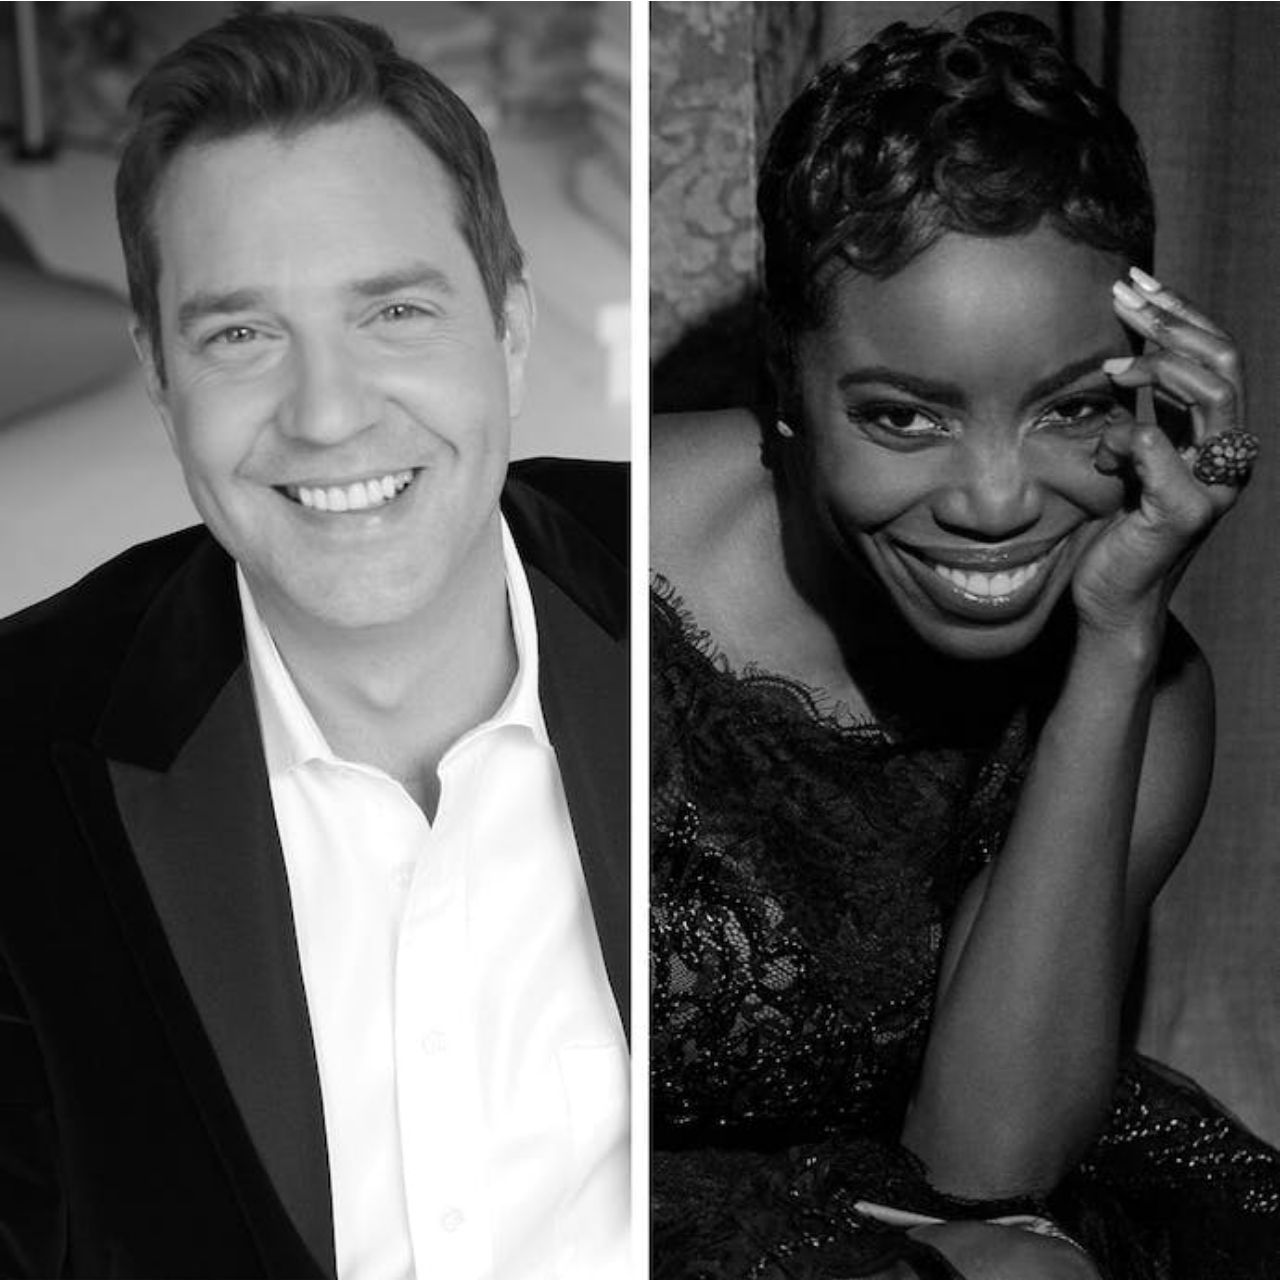 The New York Pops: An Evening with Heather Headley